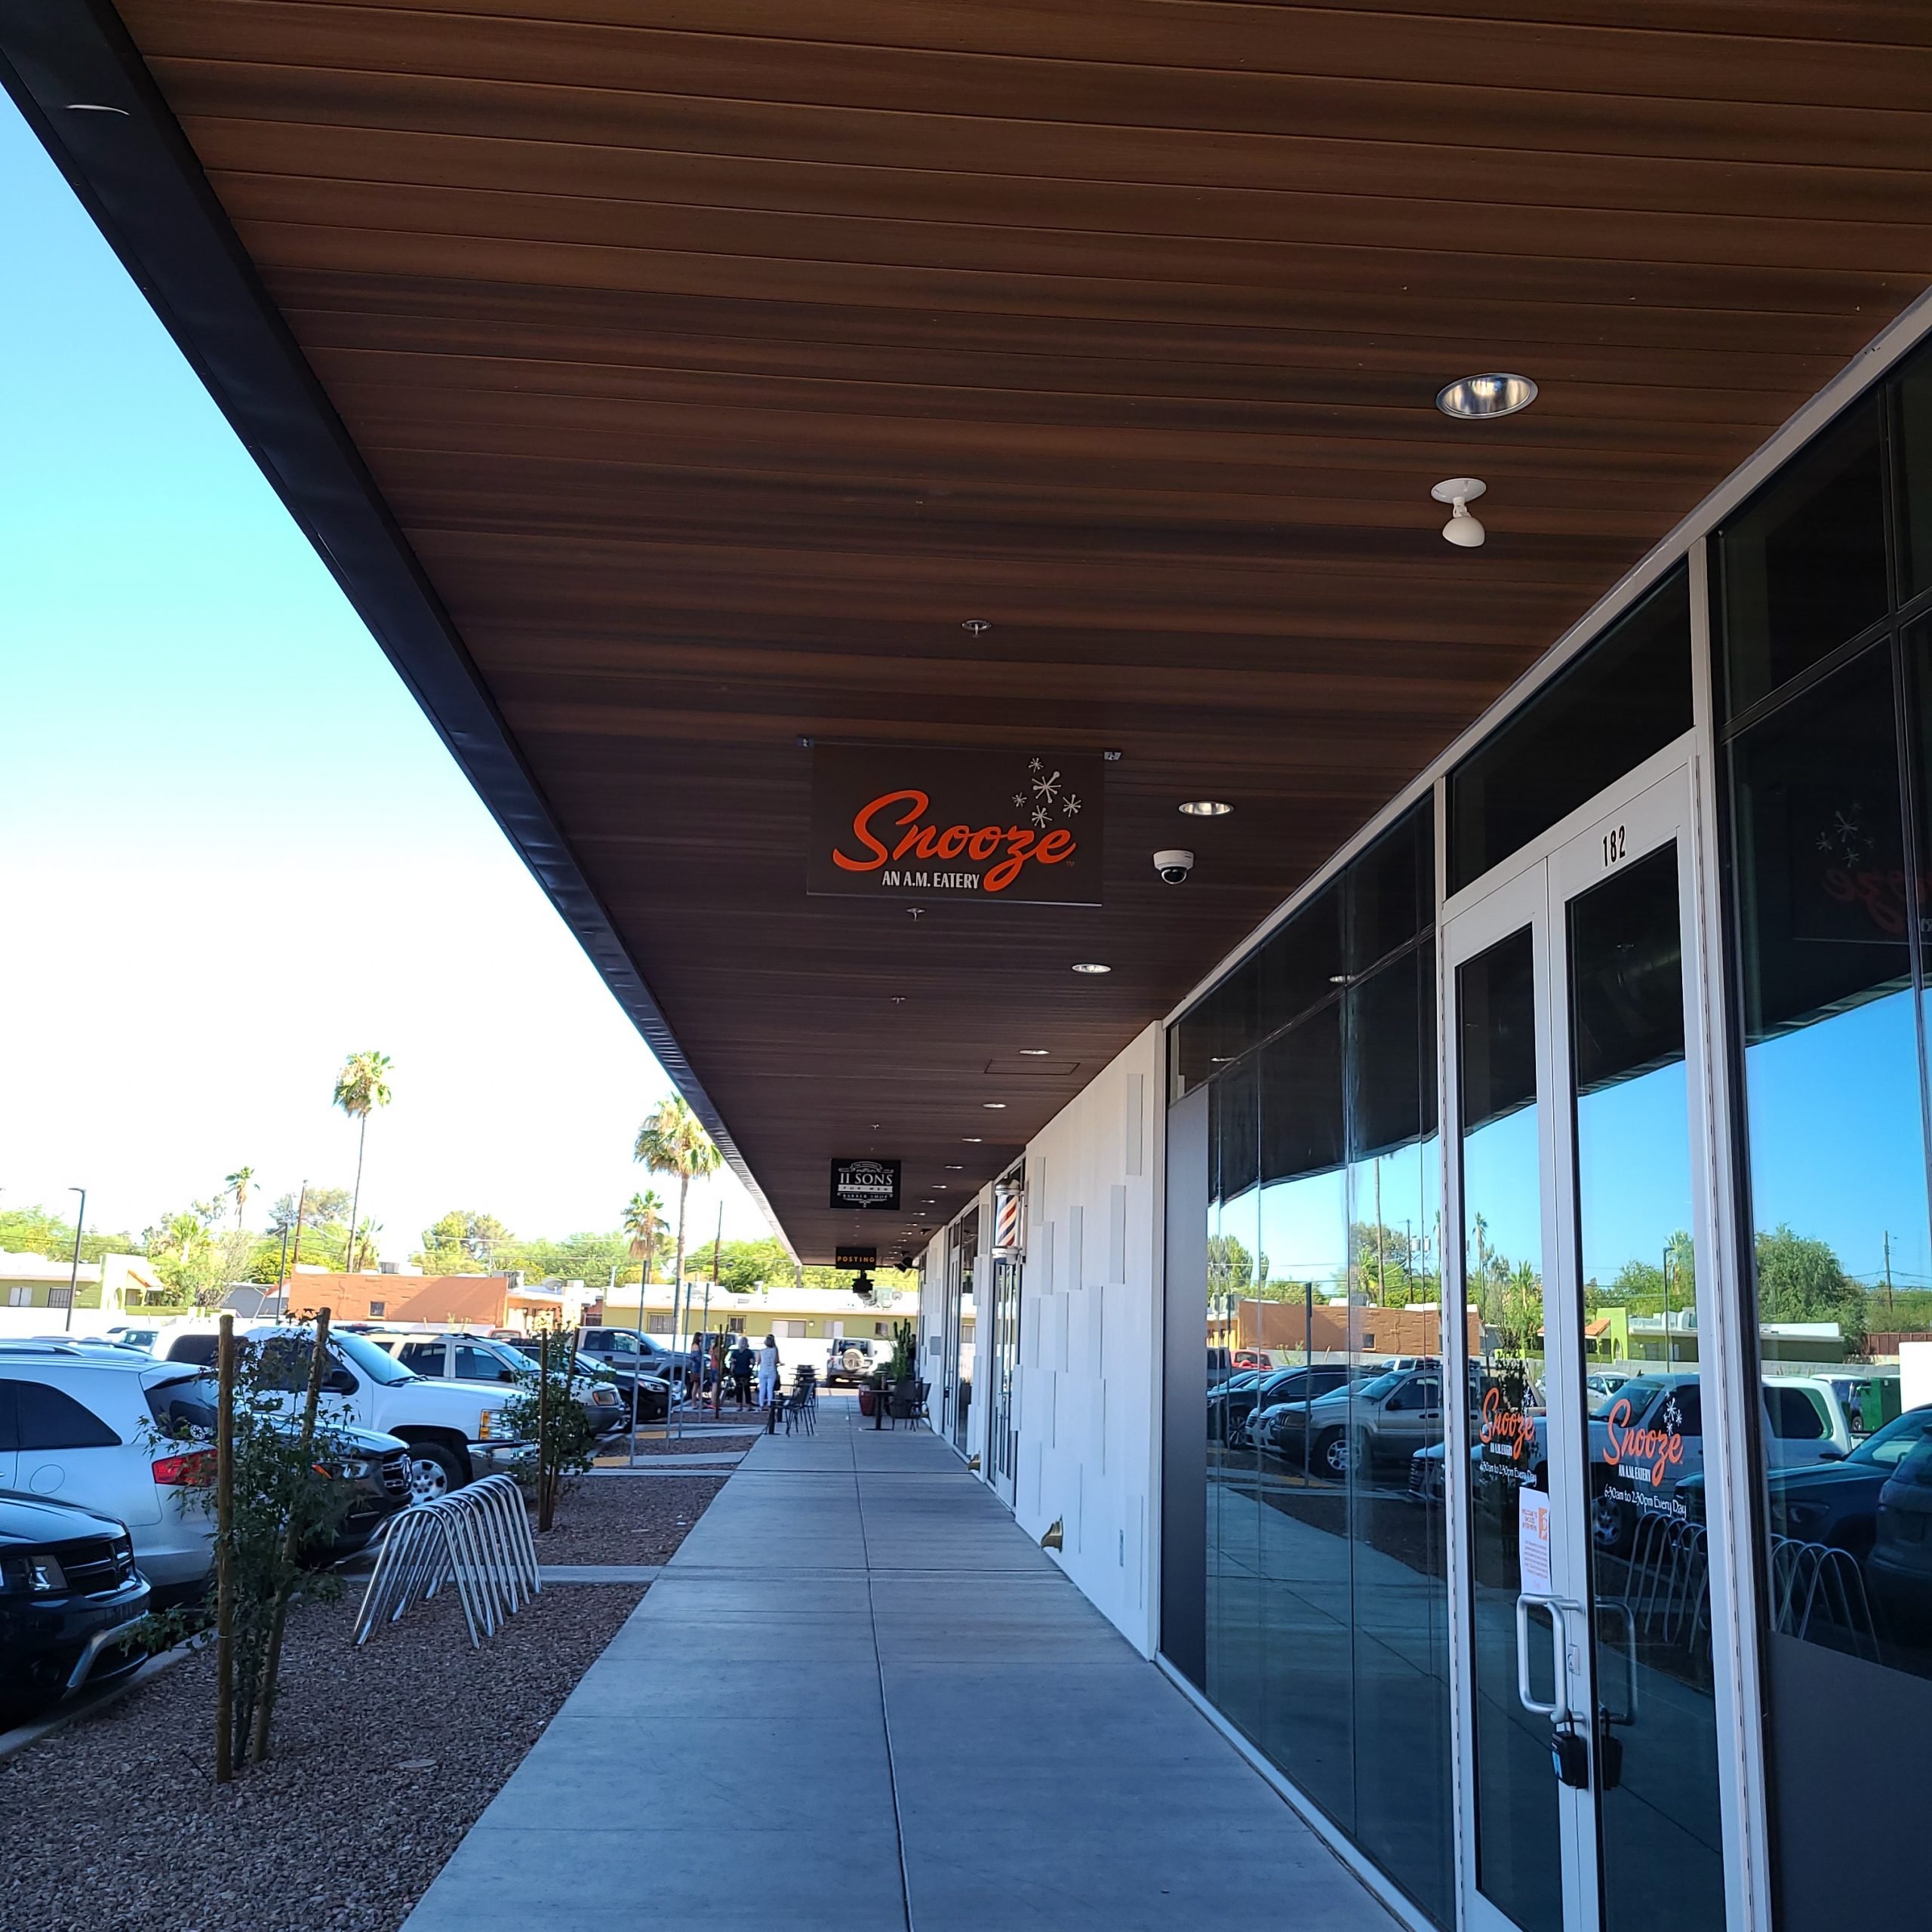 Exterior Photo Of The Snooze Restaurant & Patio In Tucson Showing The Snooze Sign & Front Door